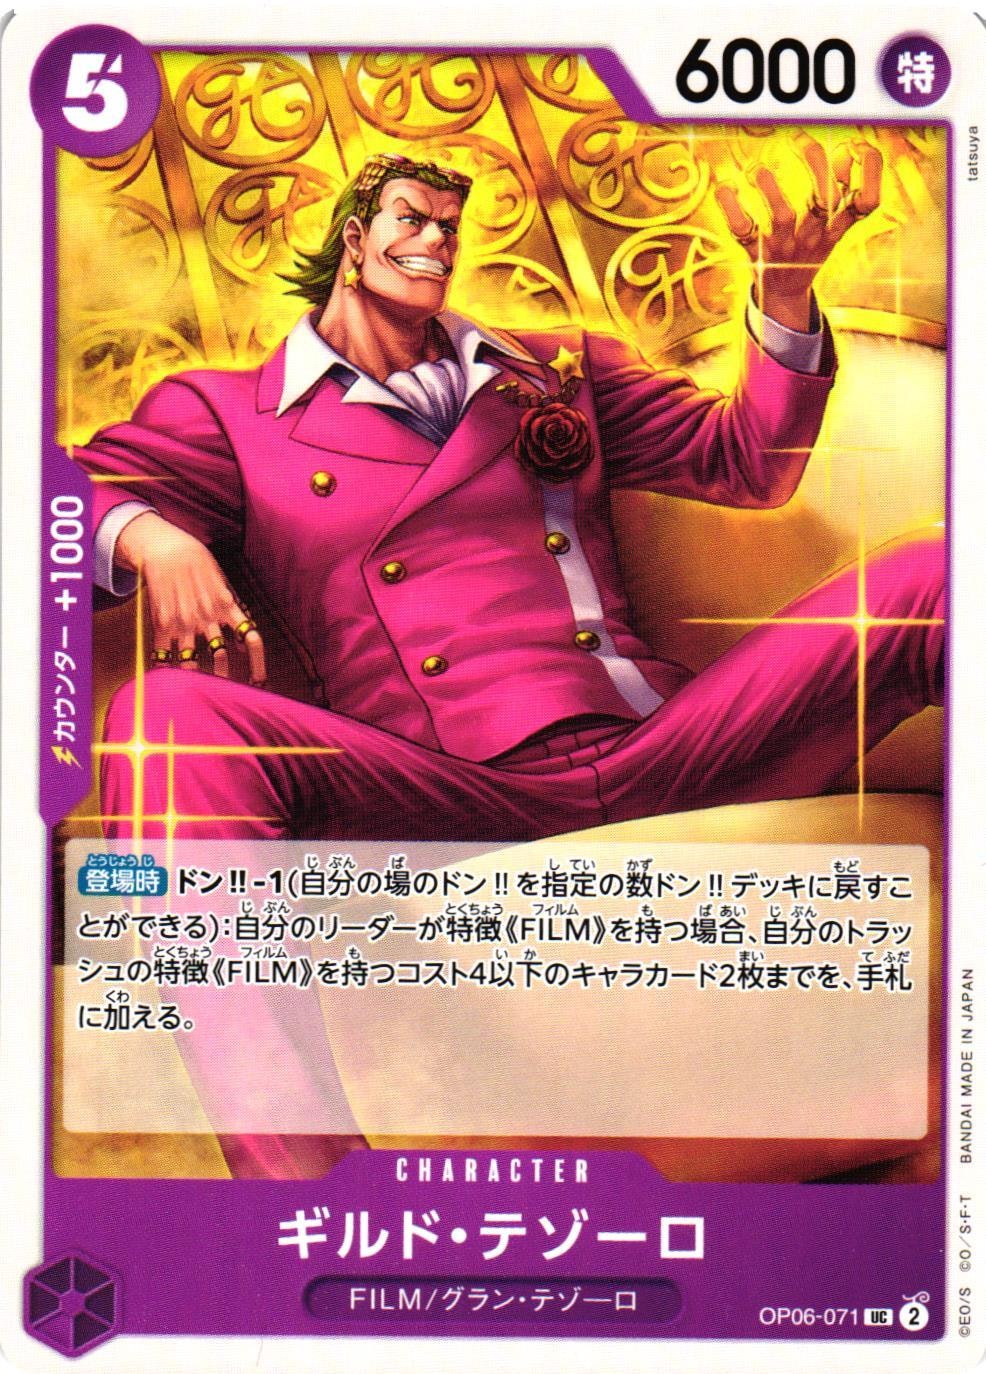 Gild Tesoro Uncommon OP06-071 Wings of the Captain One Piece